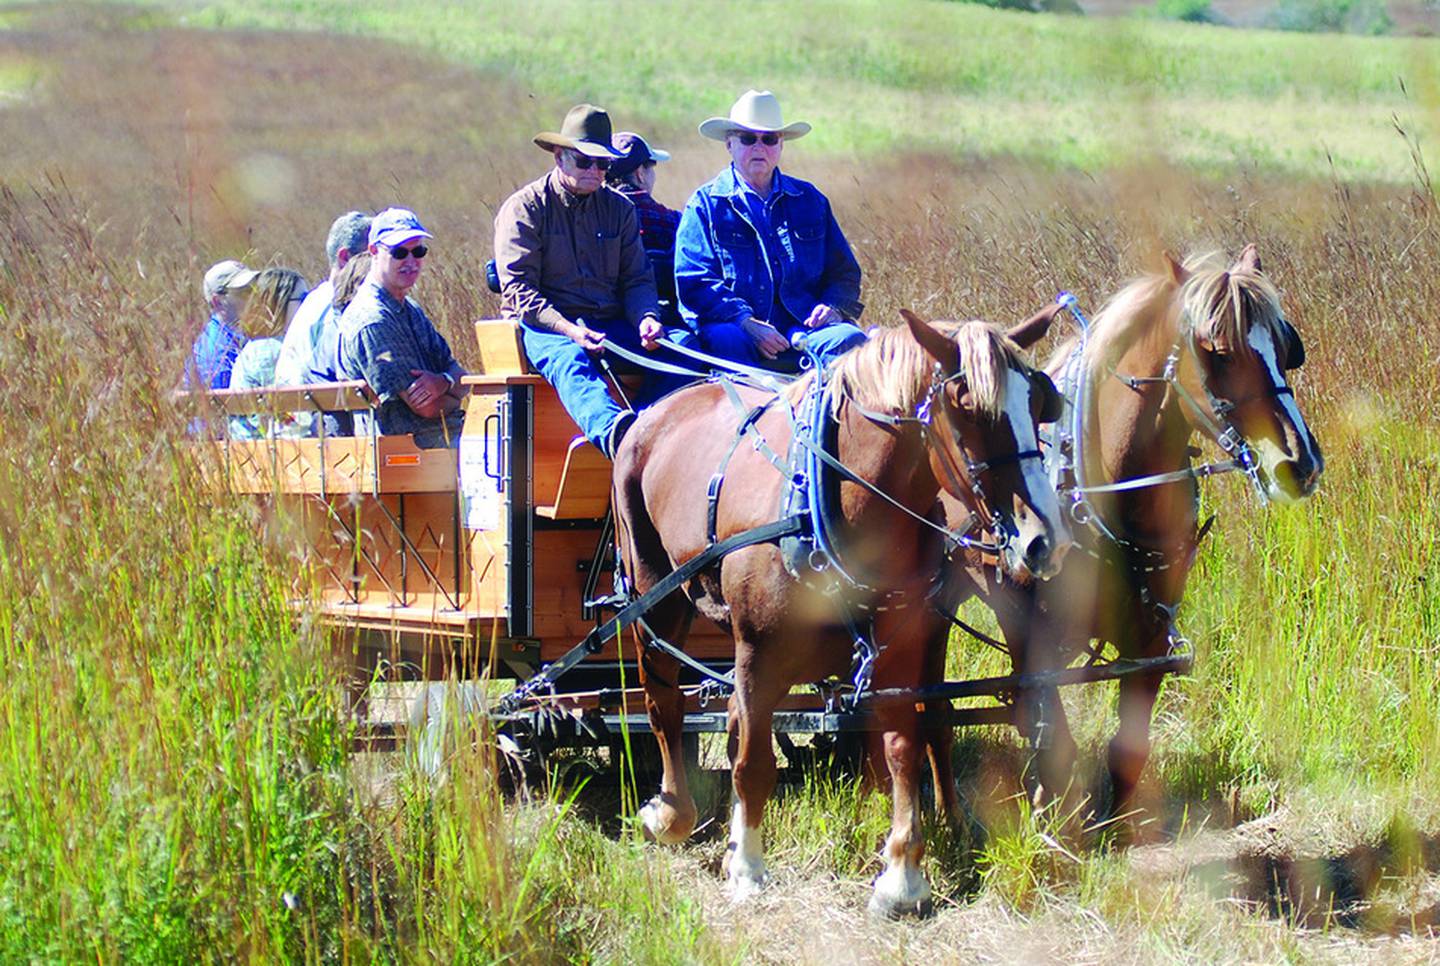 Horsedrawn wagon rides into the prairie were offered during Nachusa Grasslands' Autumn on the Prairie on Sept. 19. Photo by Earleen Hinton